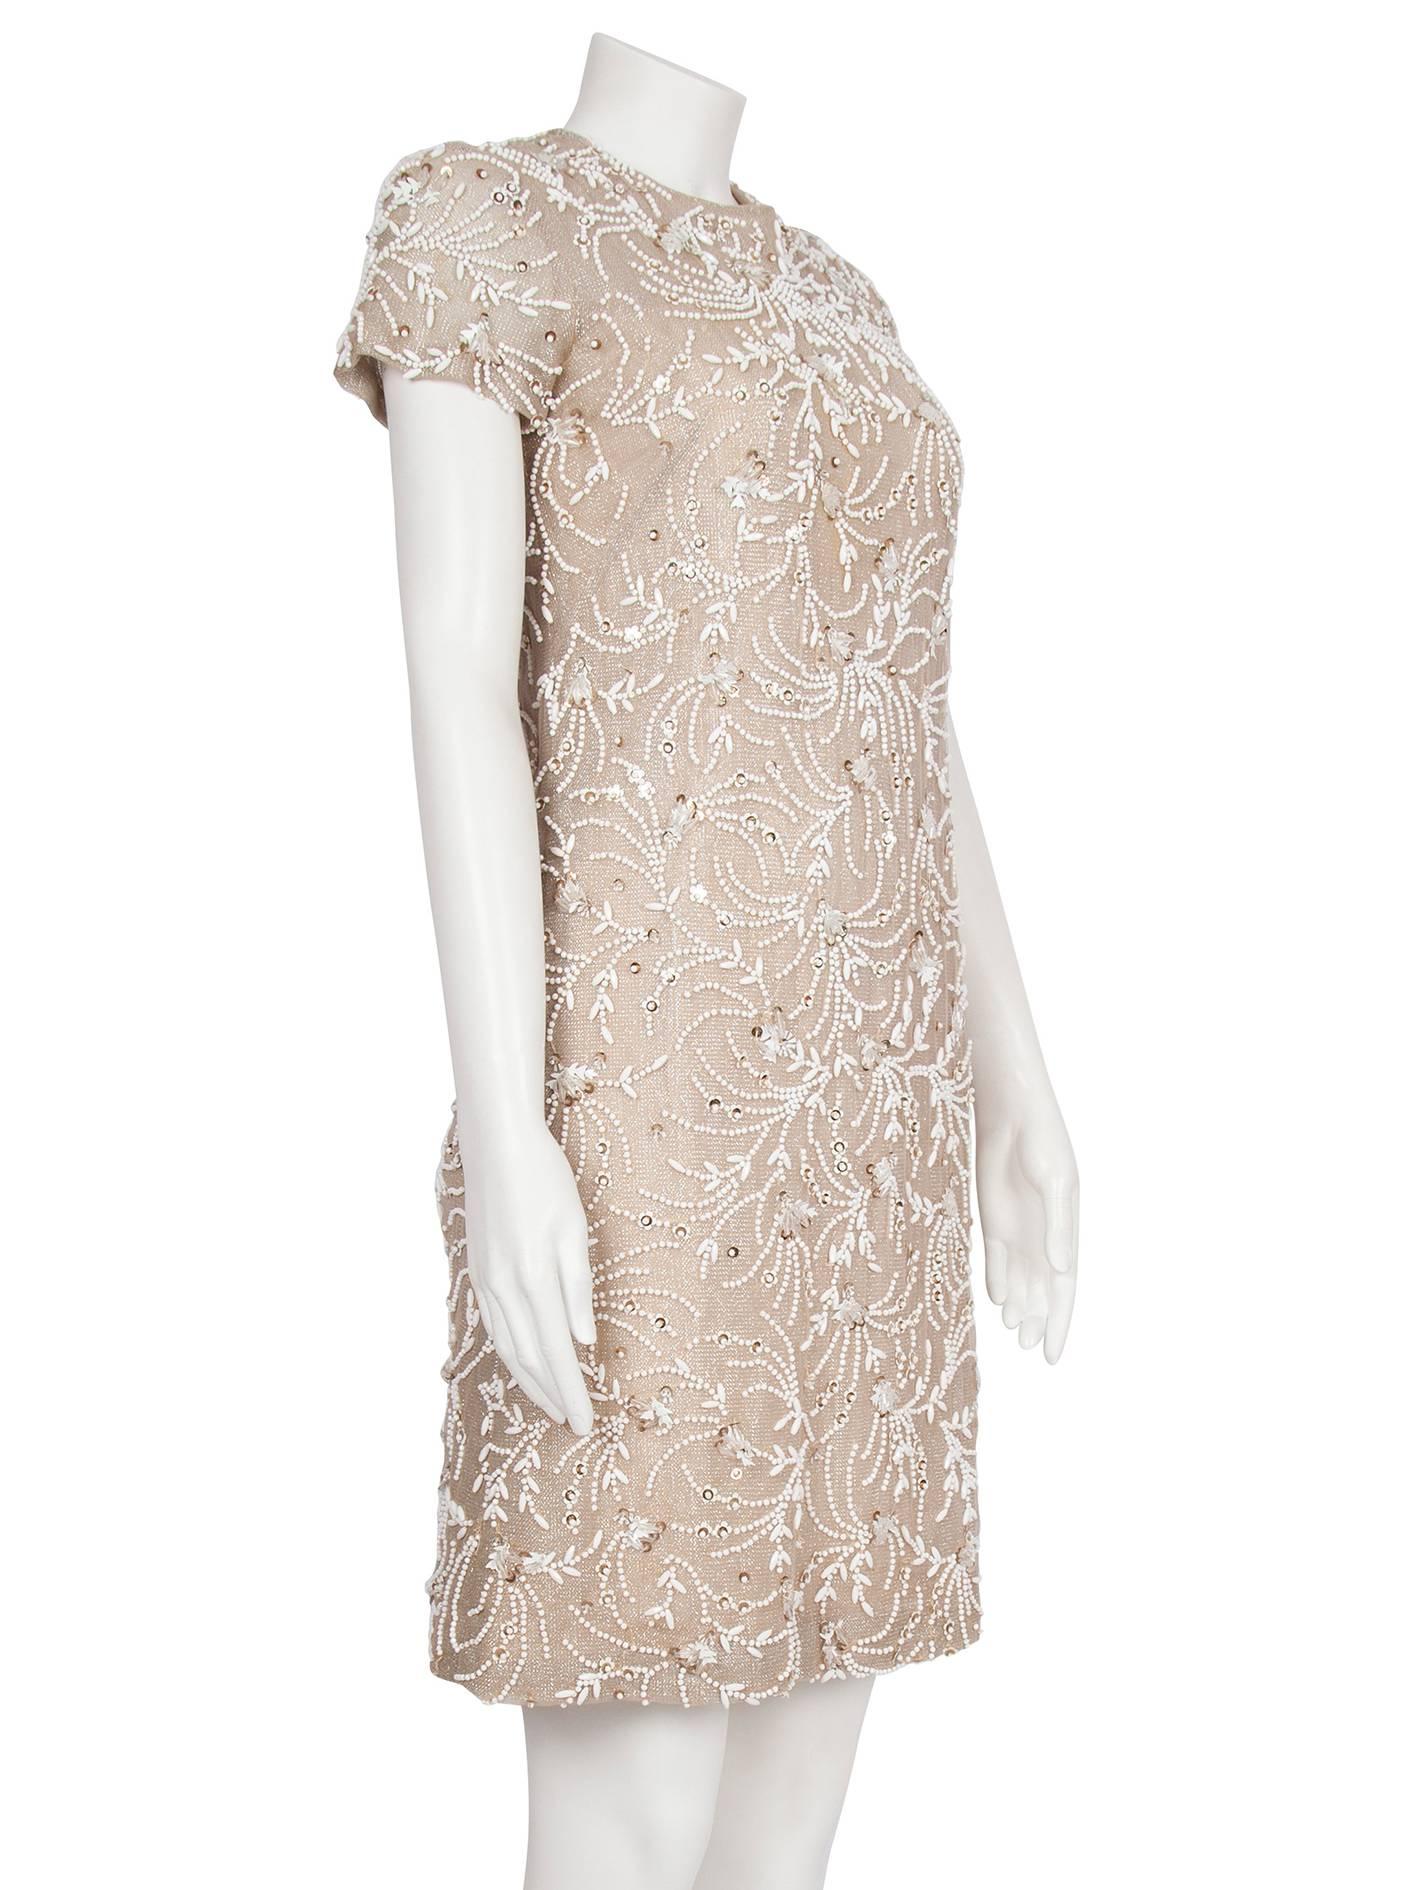 1960s Malcolm Starr Metallic and Ivory Beaded Shift Dress For Sale 2